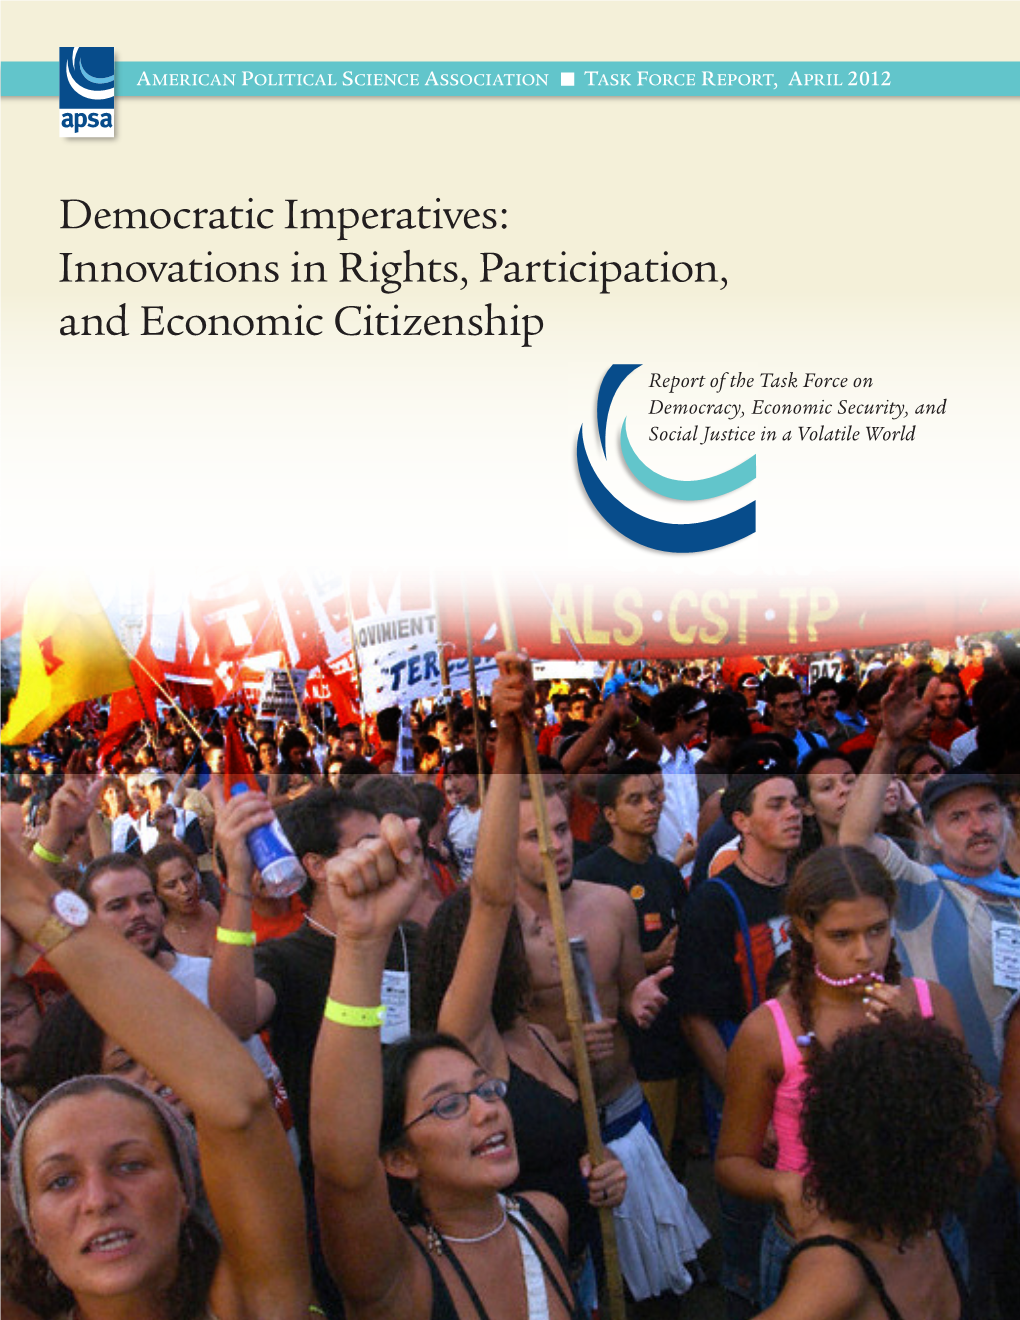 Democratic Imperatives: Innovations in Rights, Participation, and Economic Citizenship